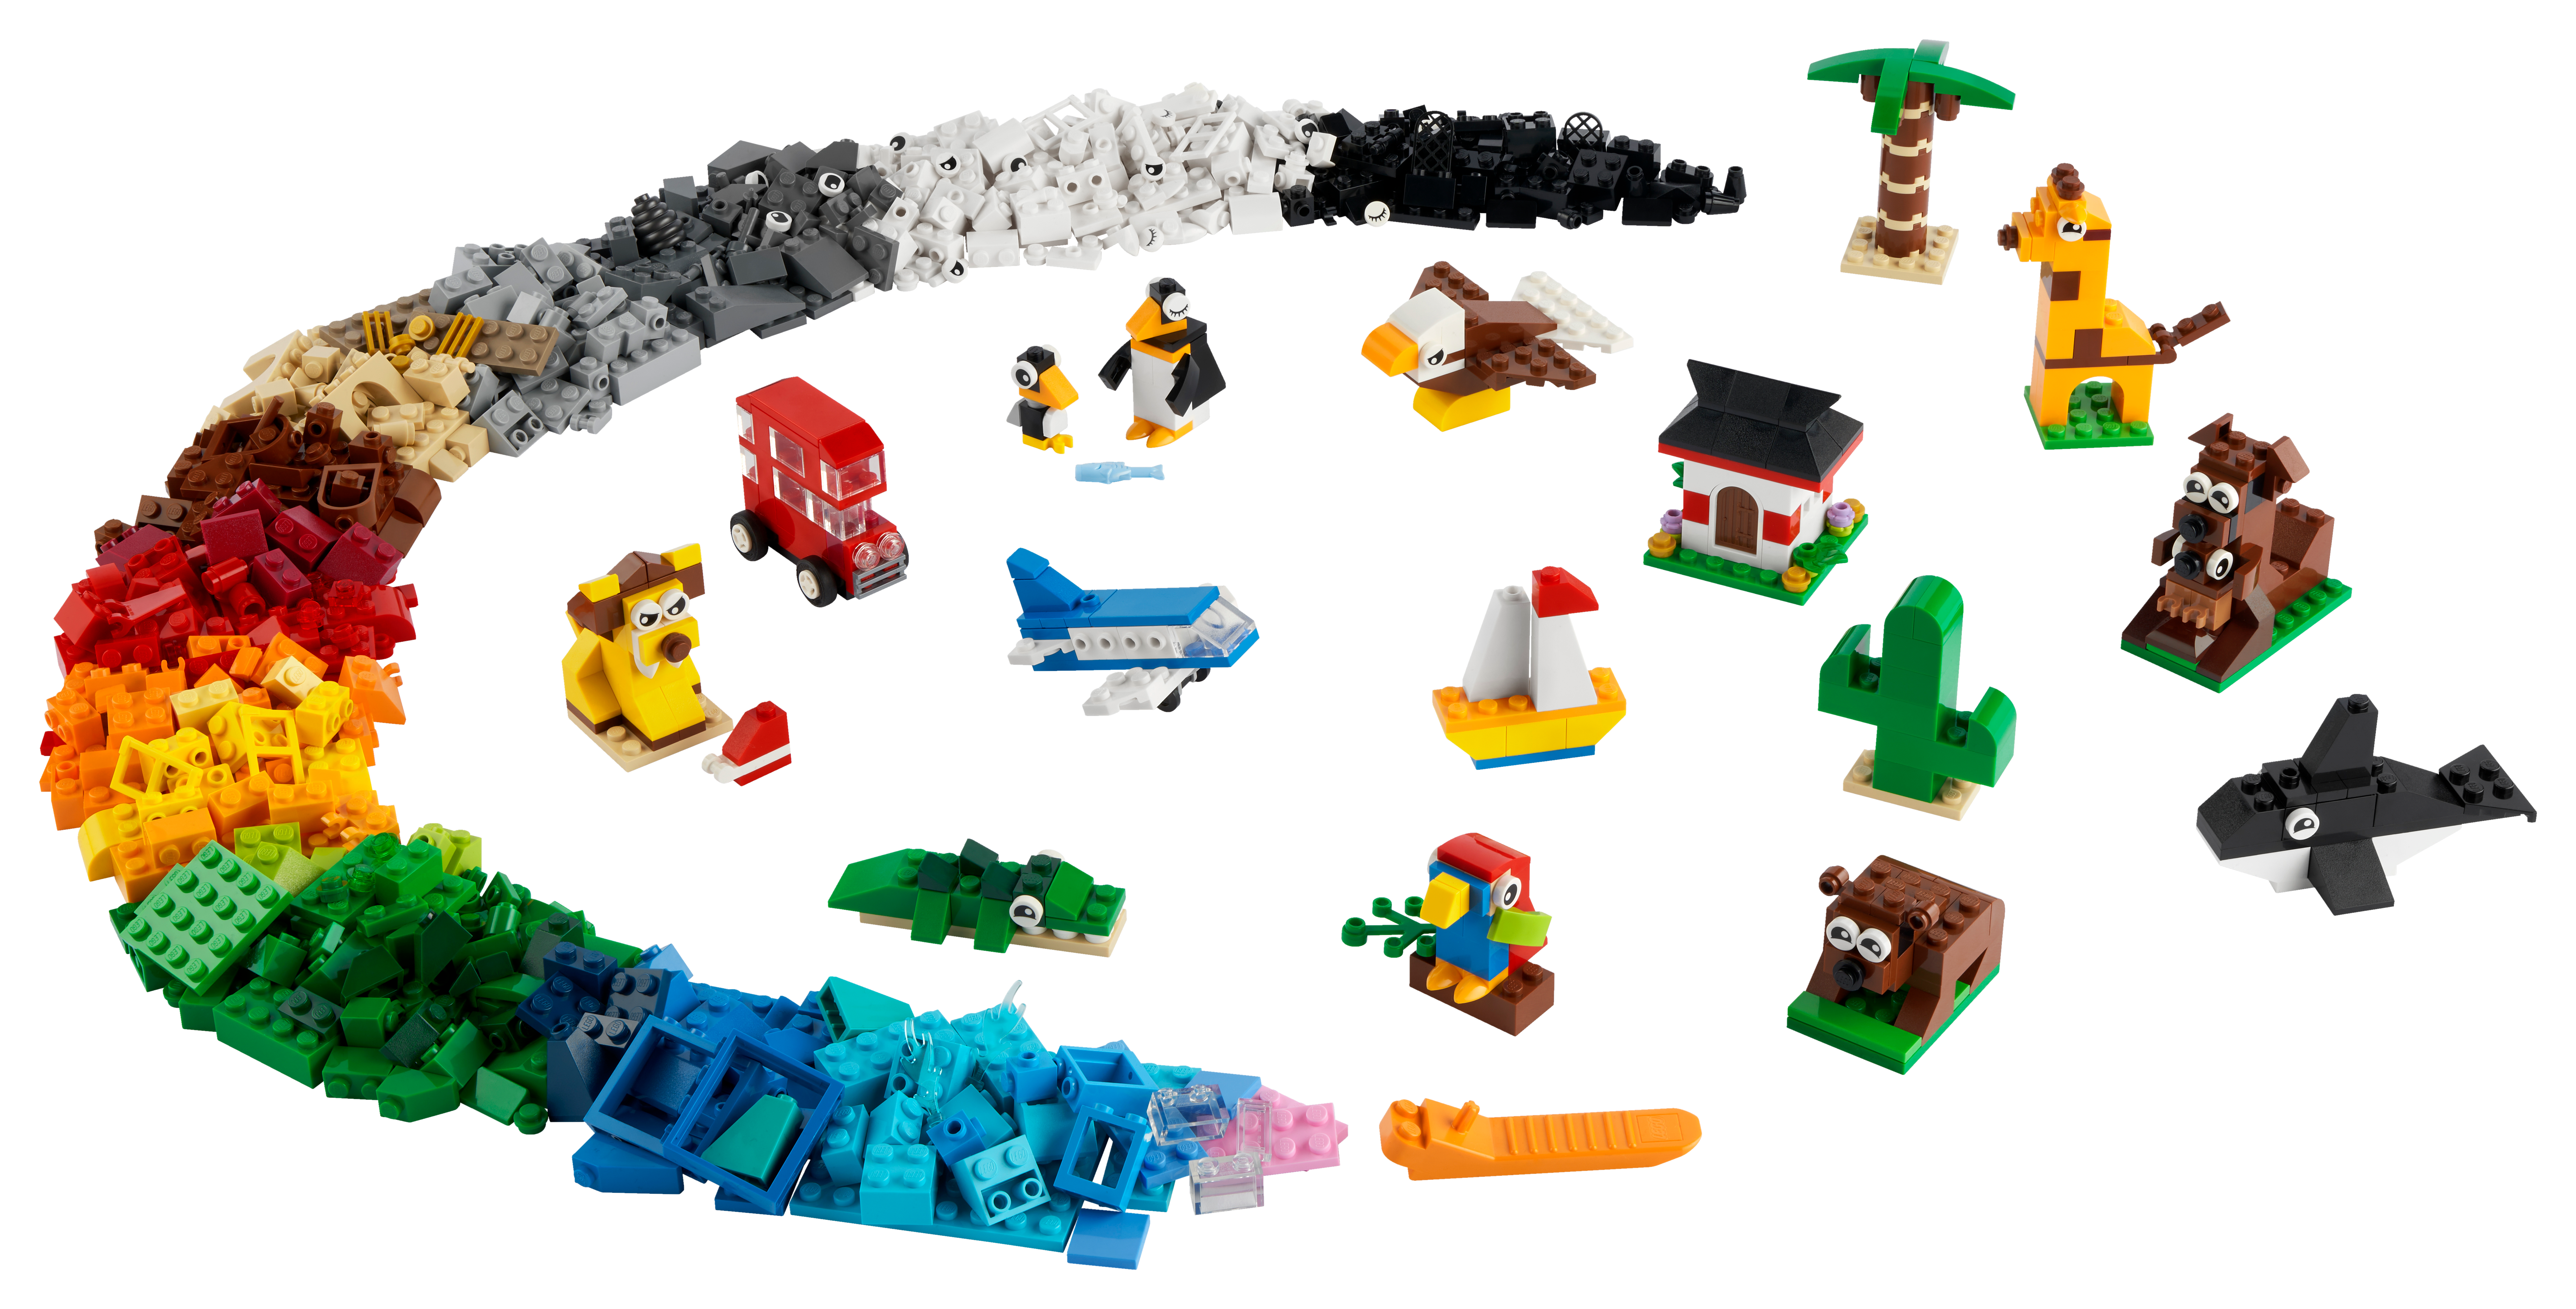 Around the World 11015 | Classic | Buy online at the Official LEGO® US